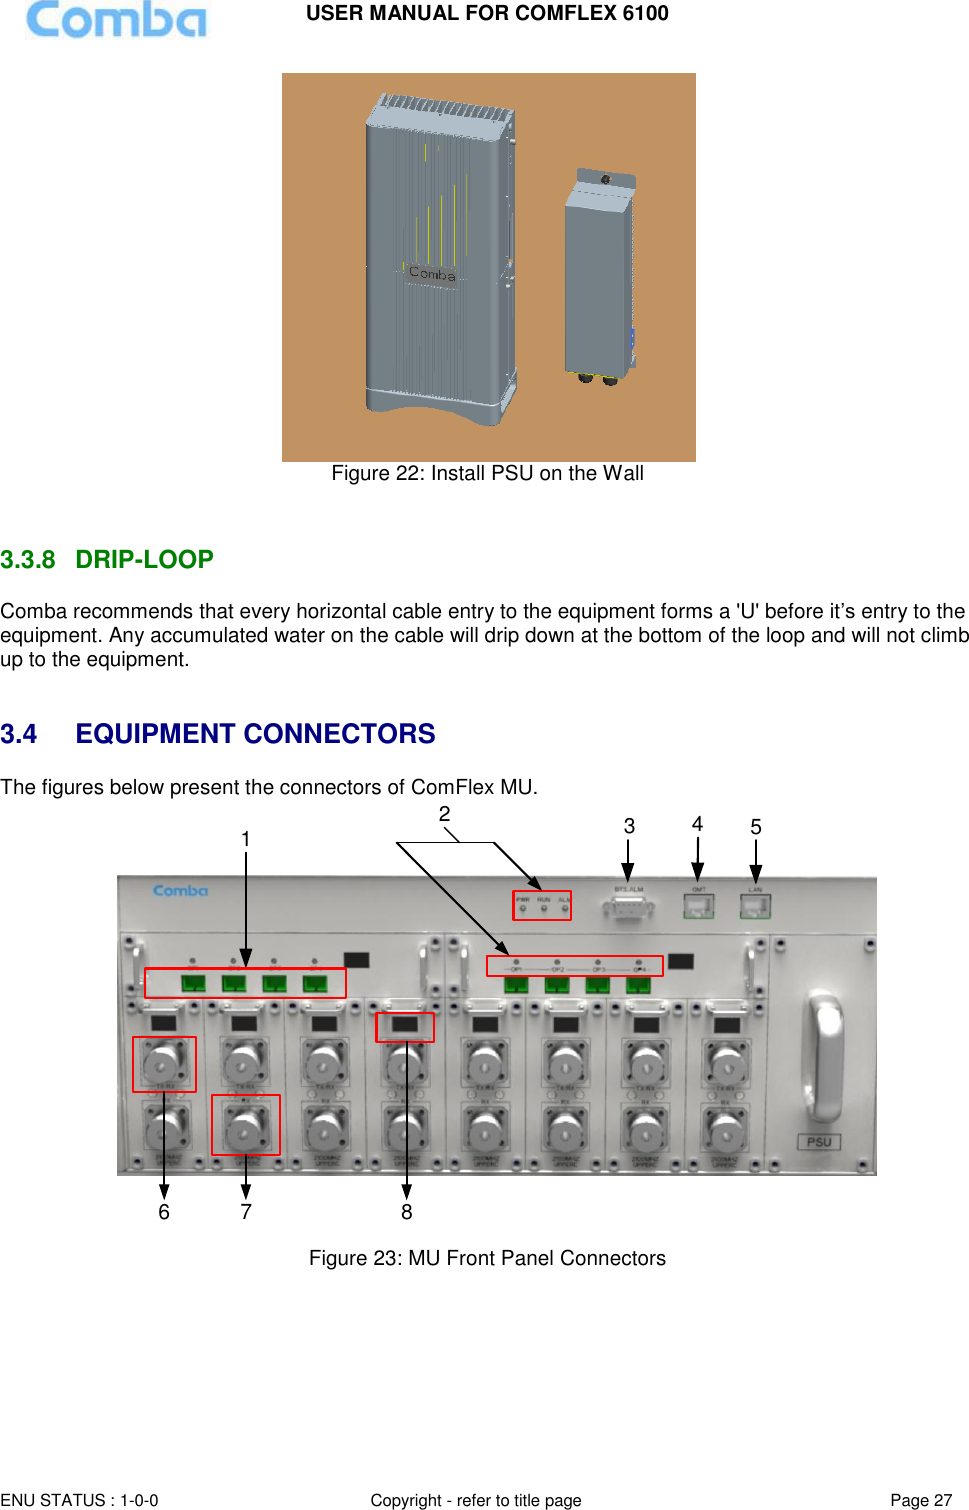 USER MANUAL FOR COMFLEX 6100 ENU STATUS : 1-0-0 Copyright - refer to title page Page 27   Figure 22: Install PSU on the Wall   3.3.8  DRIP-LOOP Comba recommends that every horizontal cable entry to the equipment forms a &apos;U&apos; before it’s entry to the equipment. Any accumulated water on the cable will drip down at the bottom of the loop and will not climb up to the equipment.   3.4  EQUIPMENT CONNECTORS The figures below present the connectors of ComFlex MU. 123456 7 8  Figure 23: MU Front Panel Connectors   